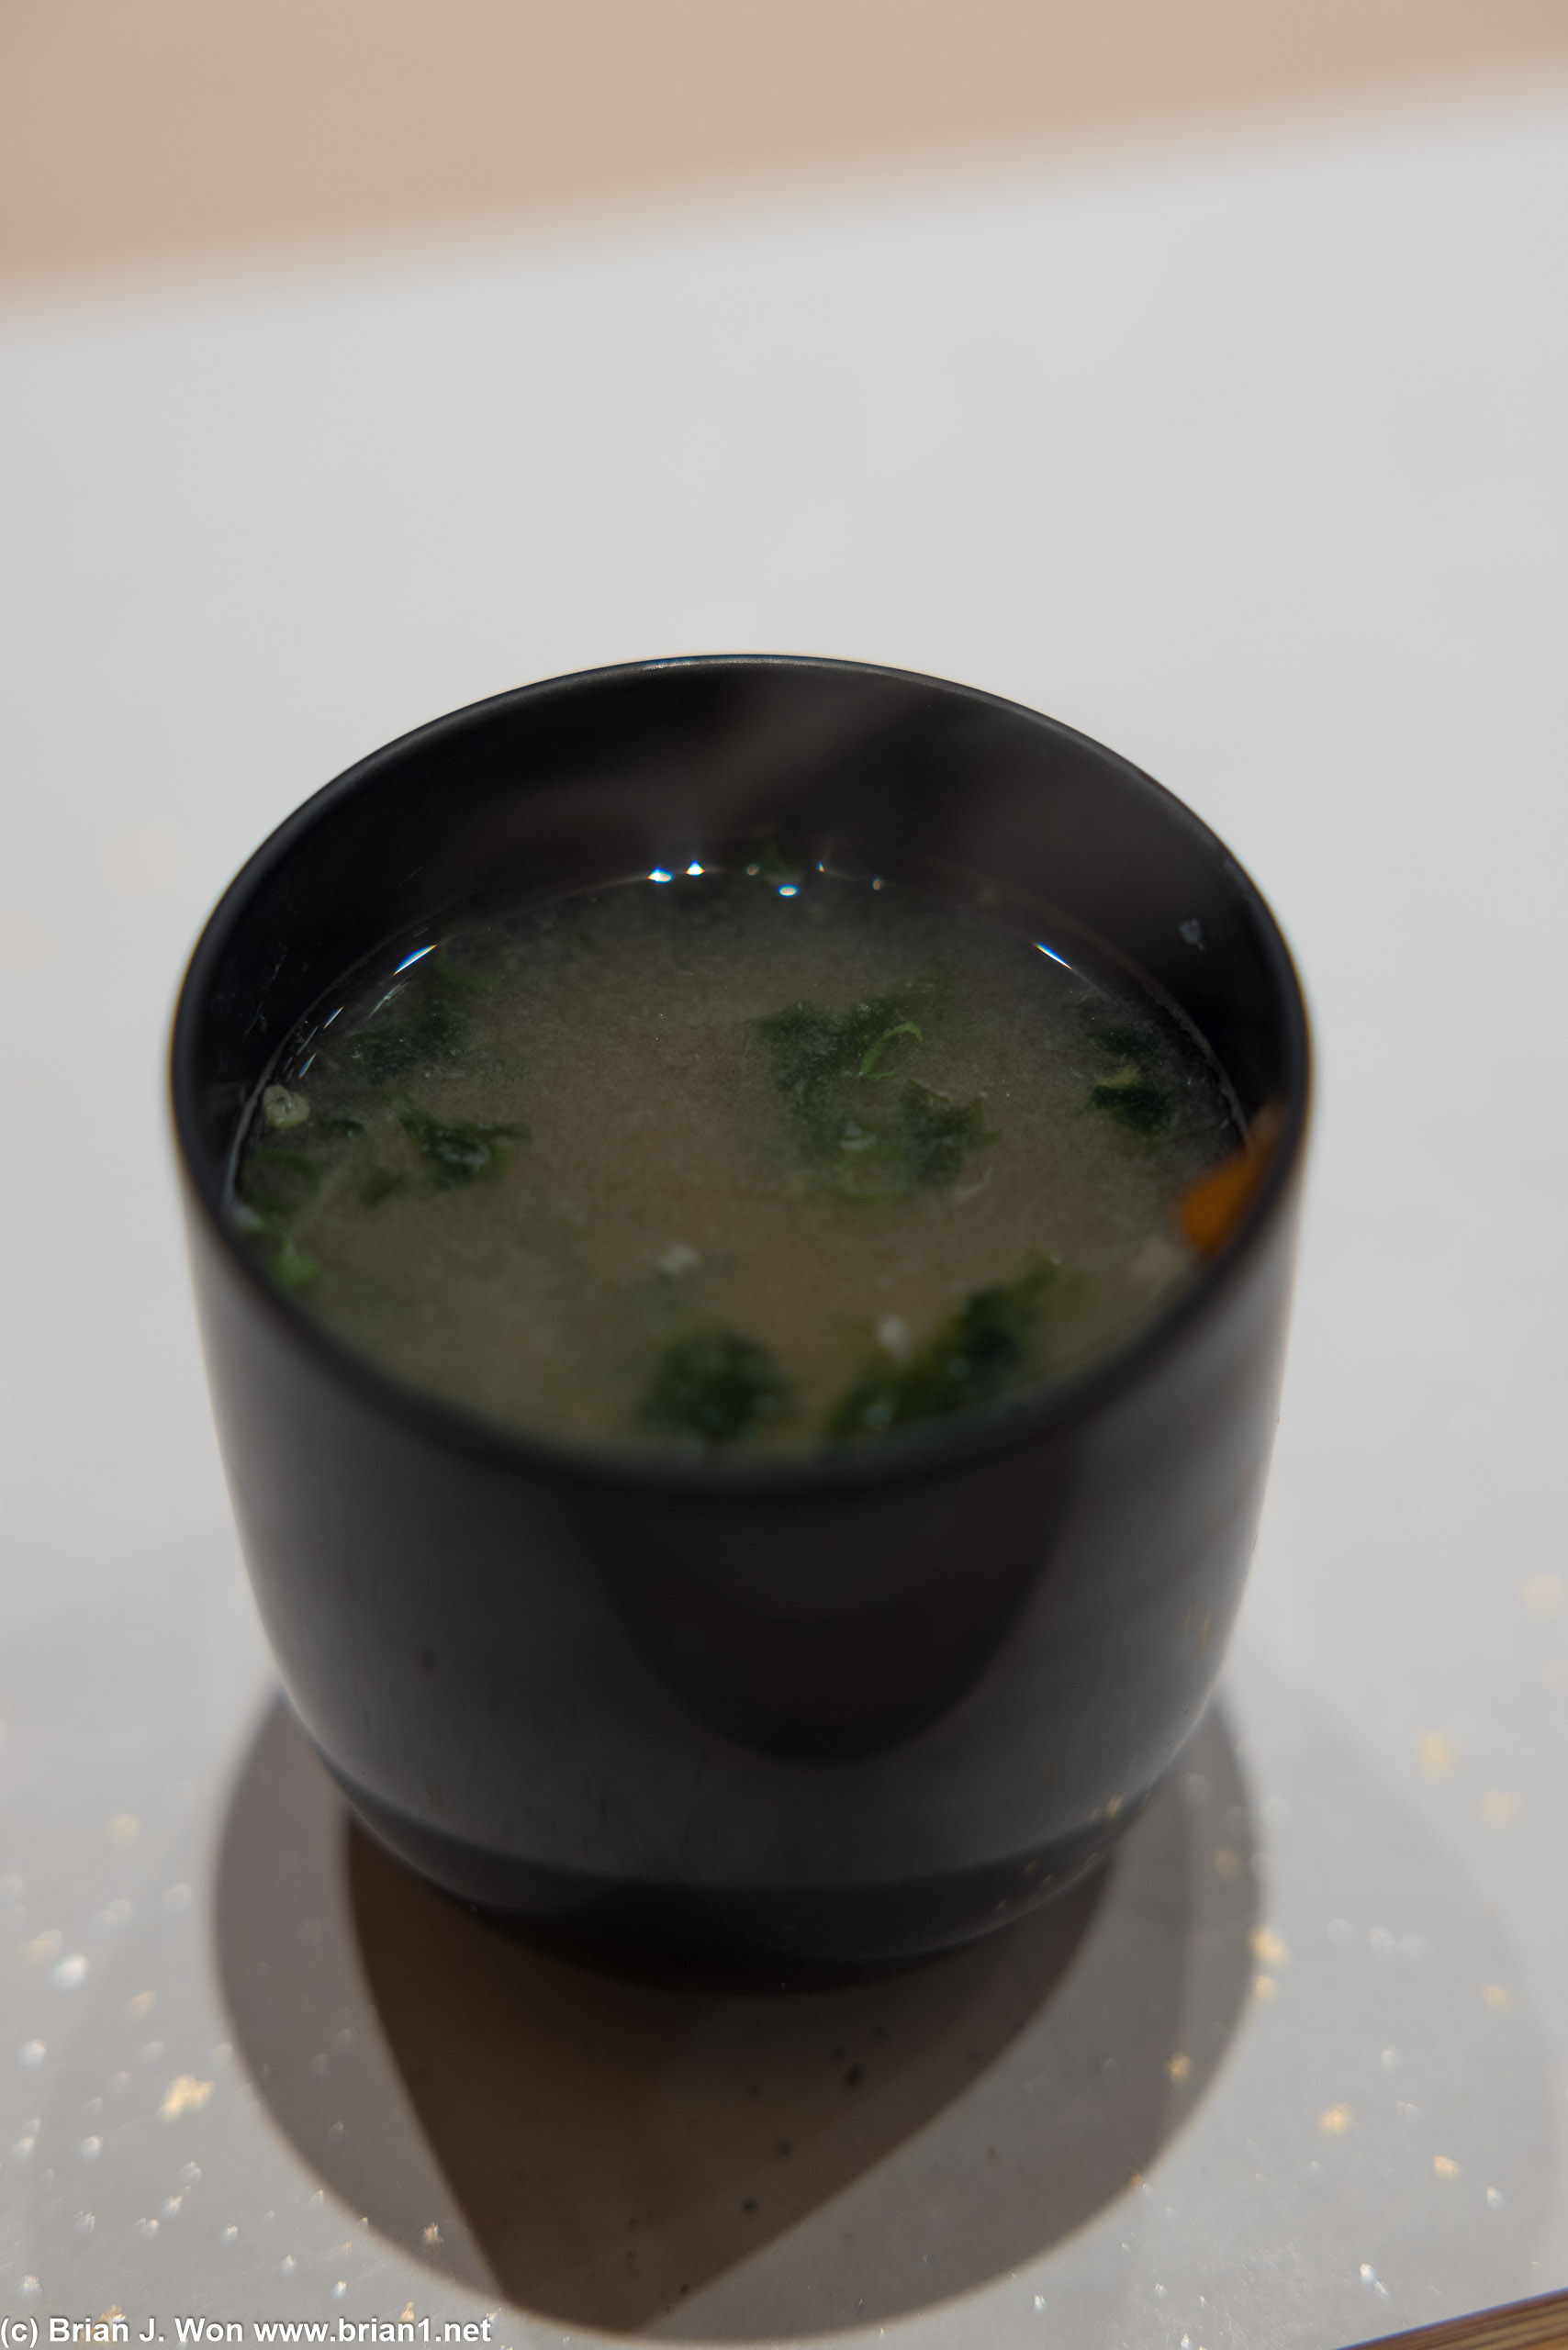 Akasa (sp?) soup with the tiniest dab of yuzu cherry on the side.